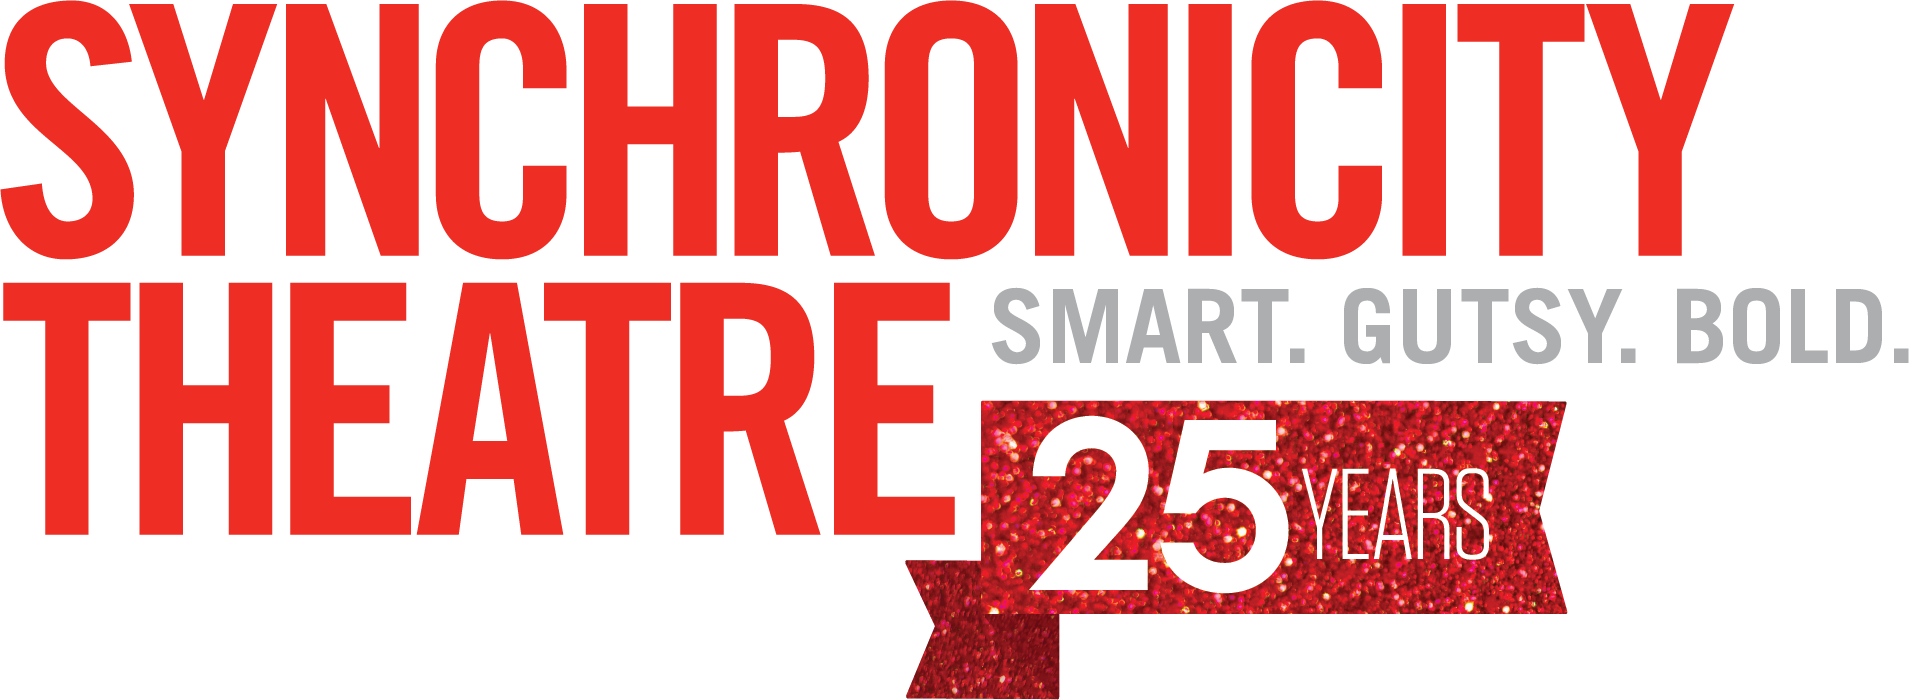 SYNCHRONICITY THEATRE: smart. gutsy. bold - 25 years